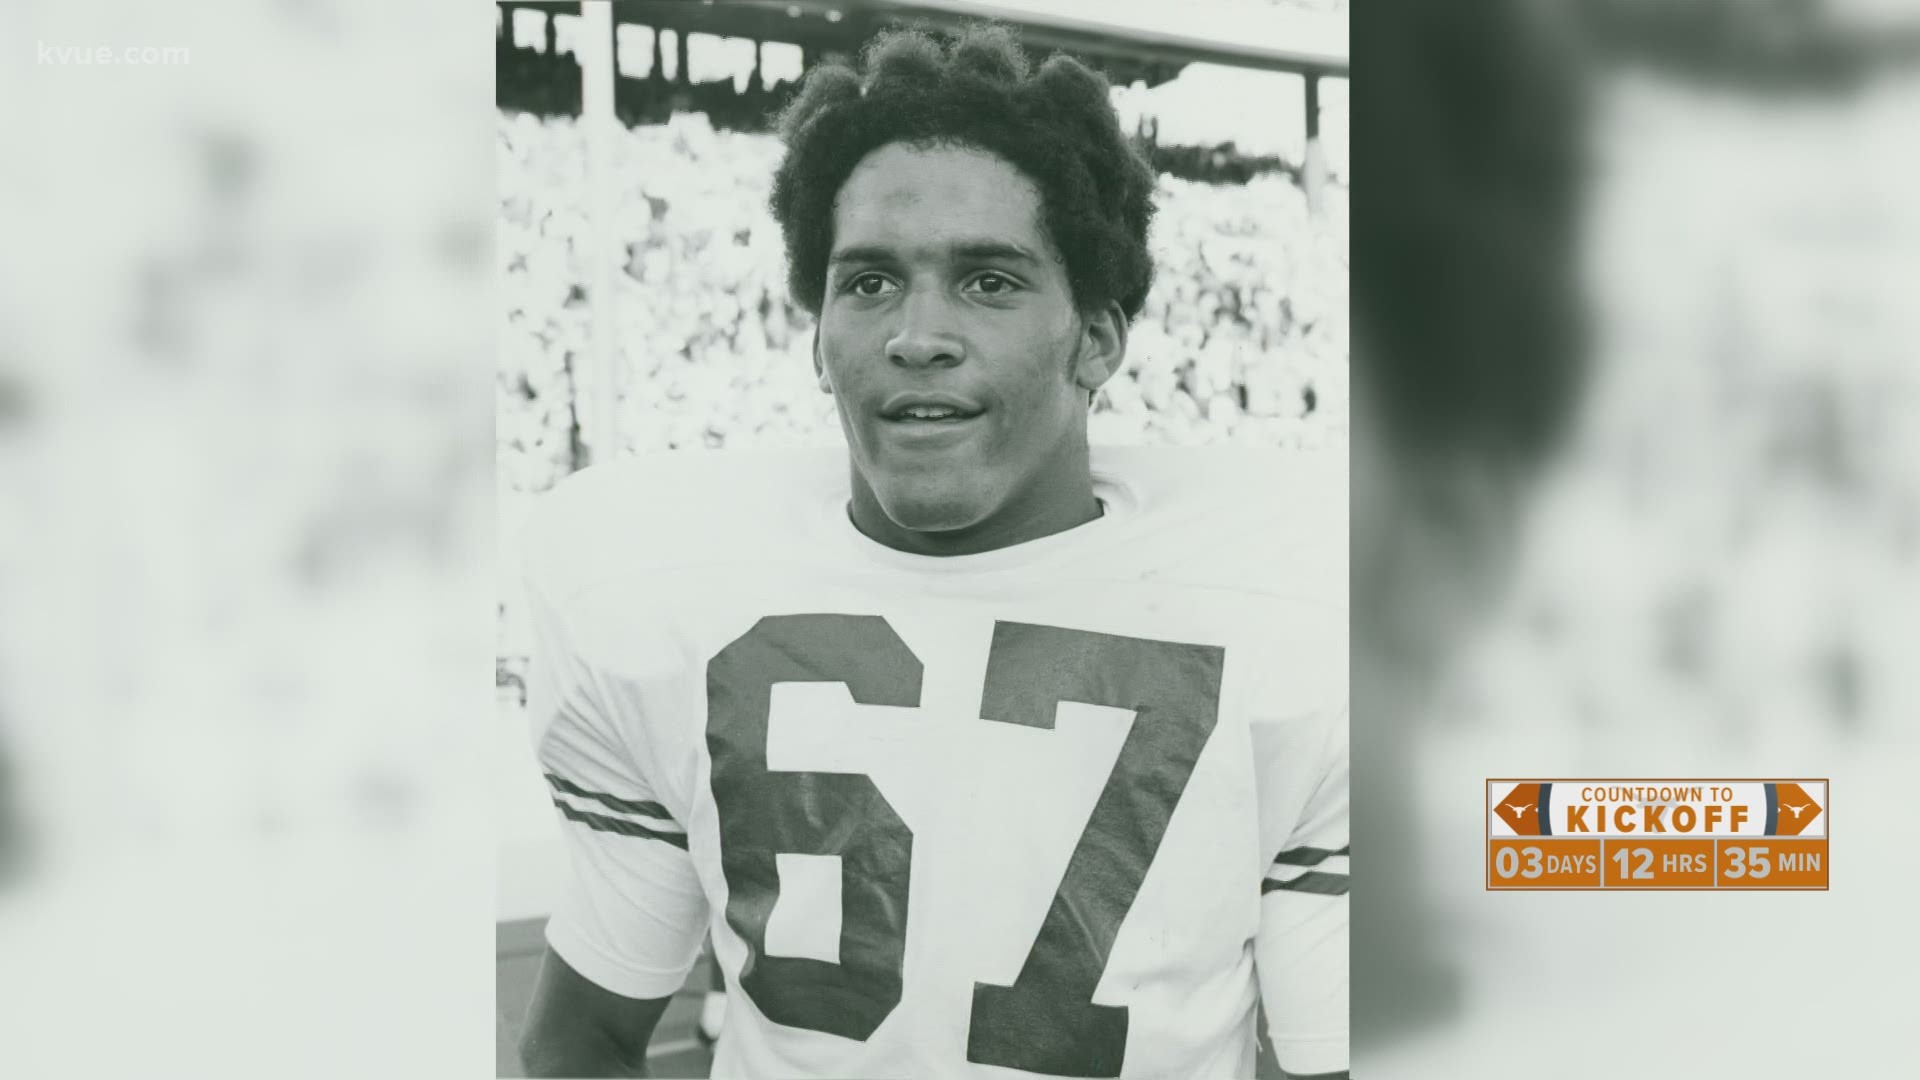 UT will unveil a new statue honoring Julius Whittier, the Longhorns' first Black letterman, ahead of the game against Iowa State.